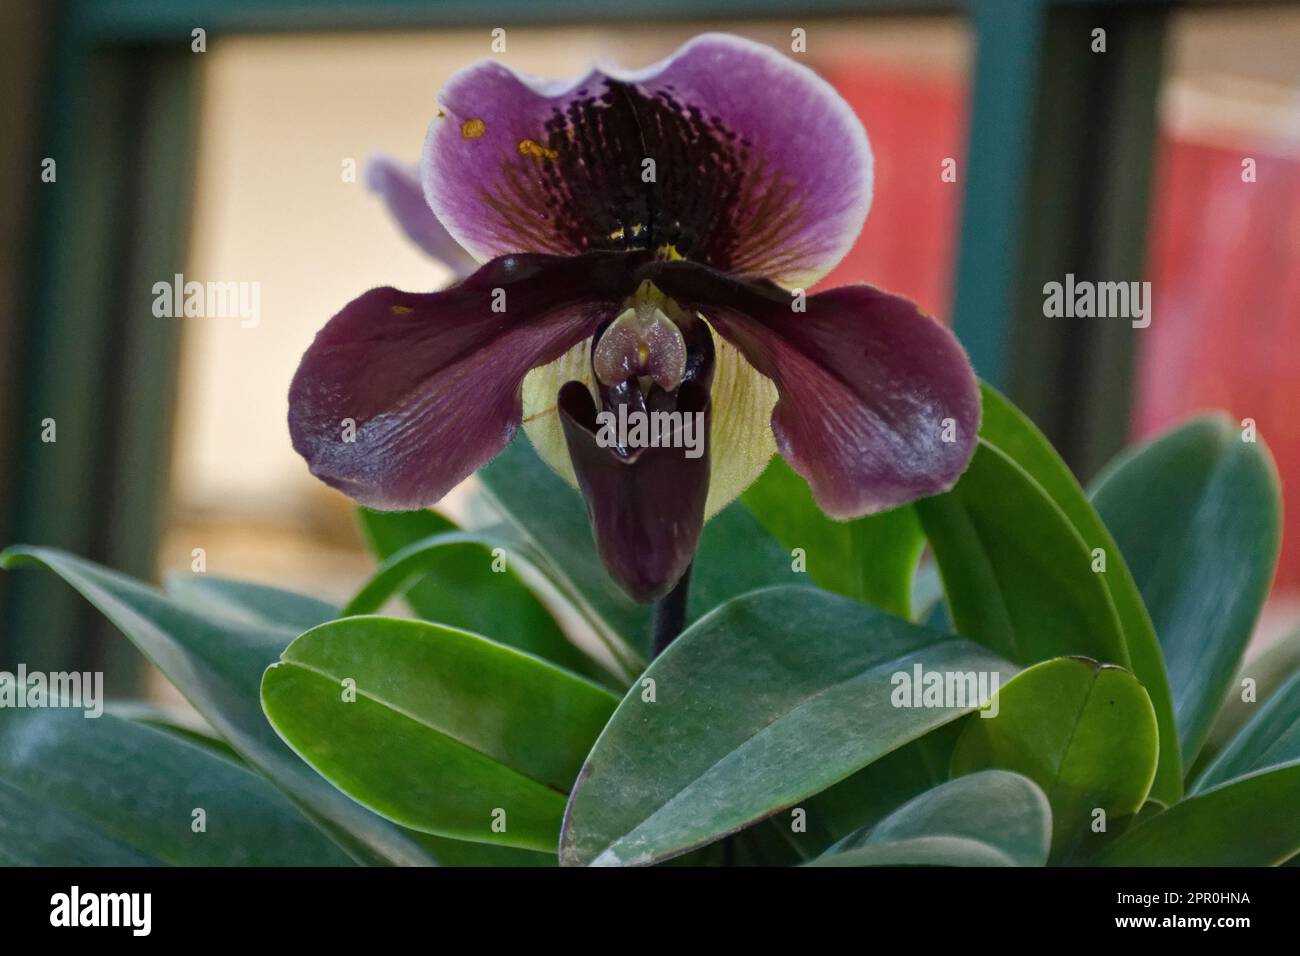 Vibrant purple exotic tropical  slipper orchid with green leaves blooming in autumn Stock Photo